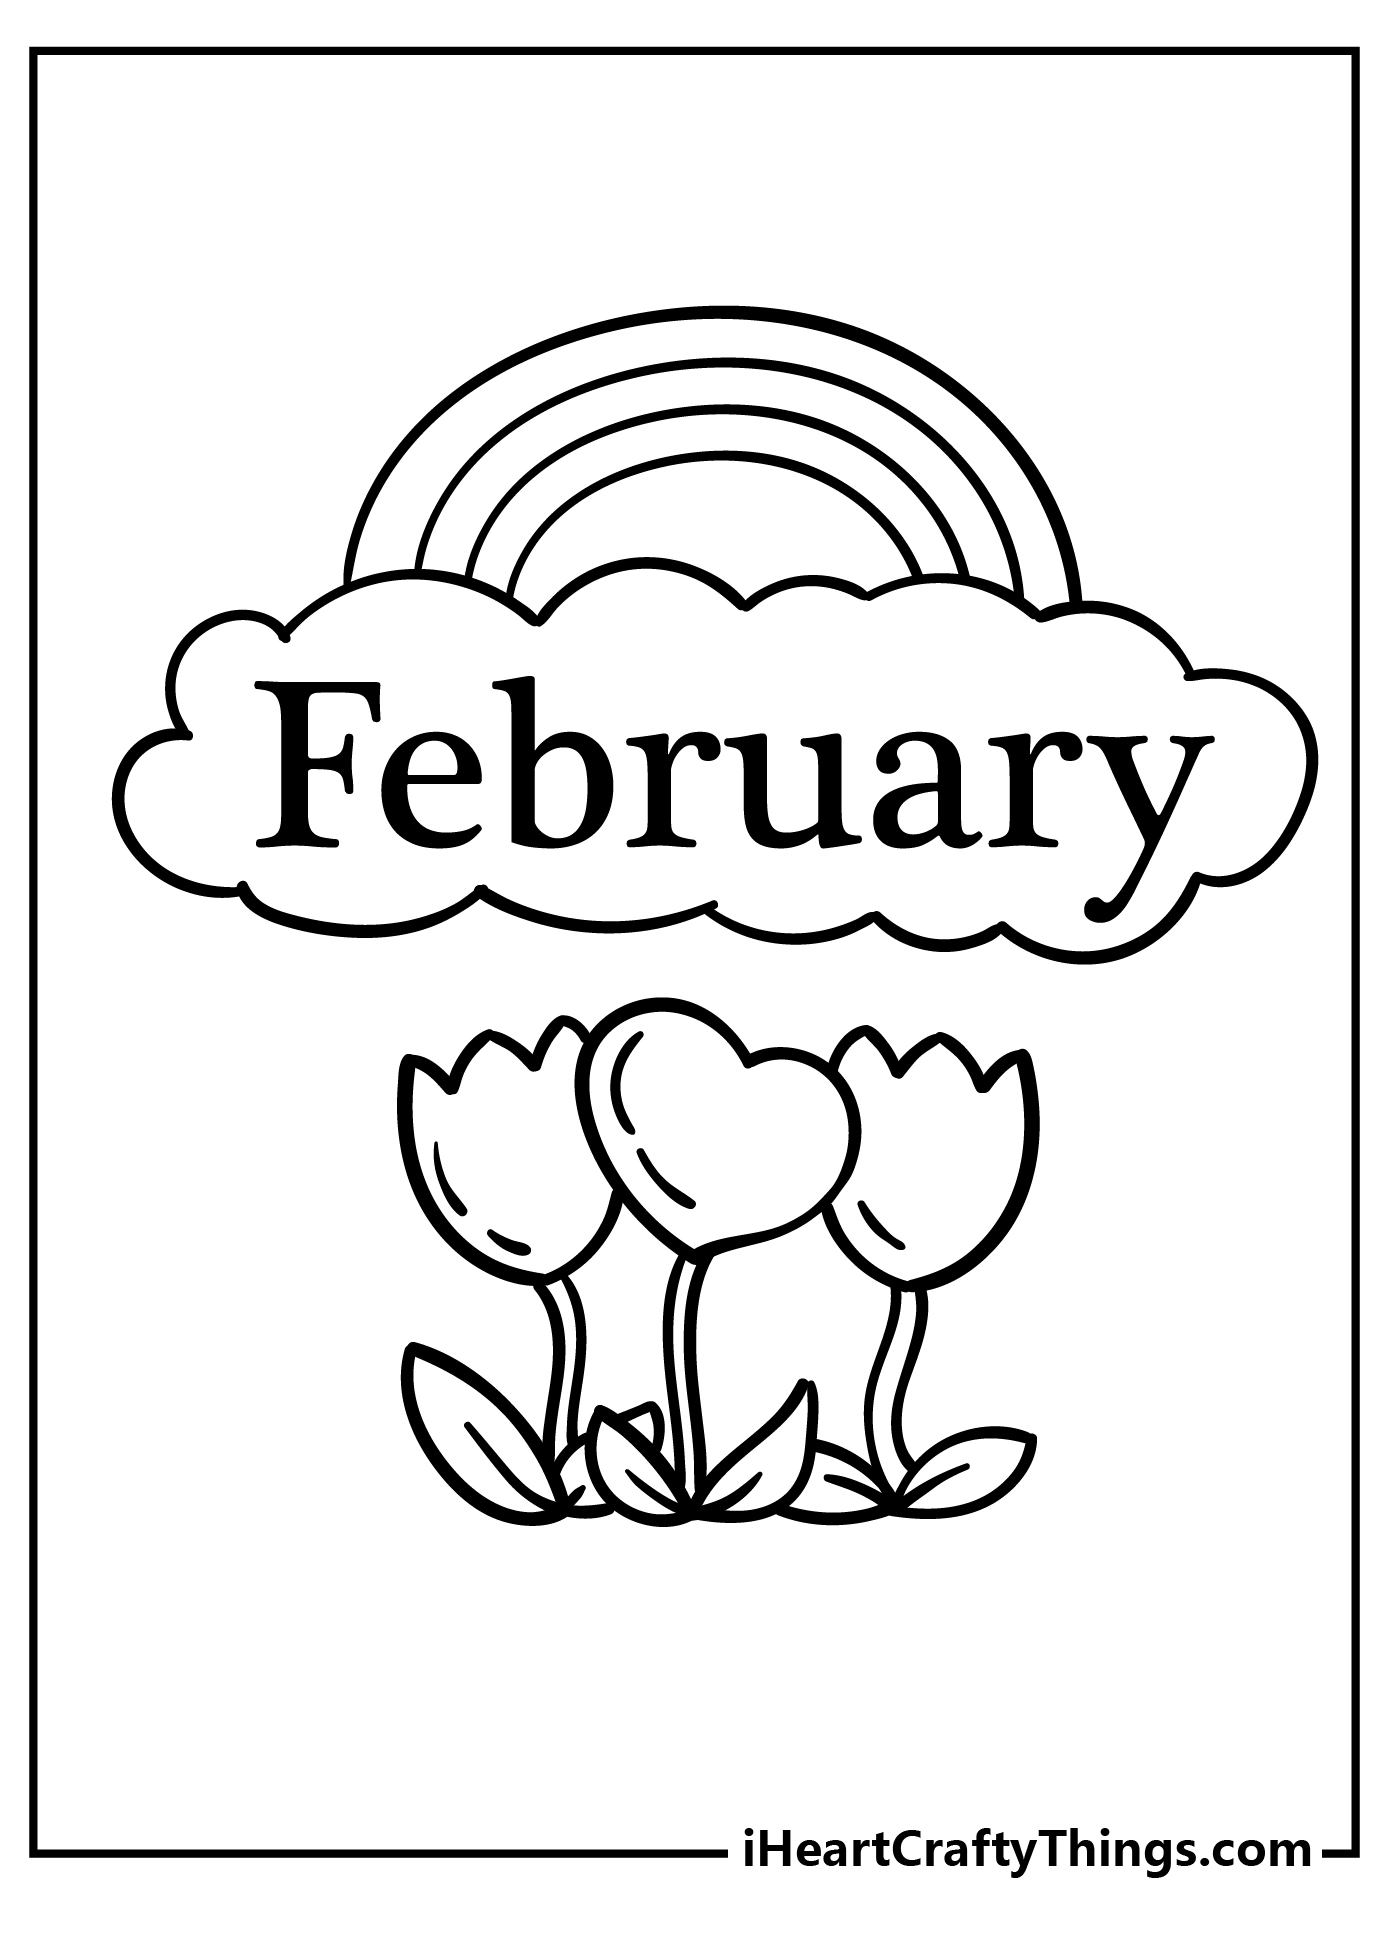 February coloring pages free printables